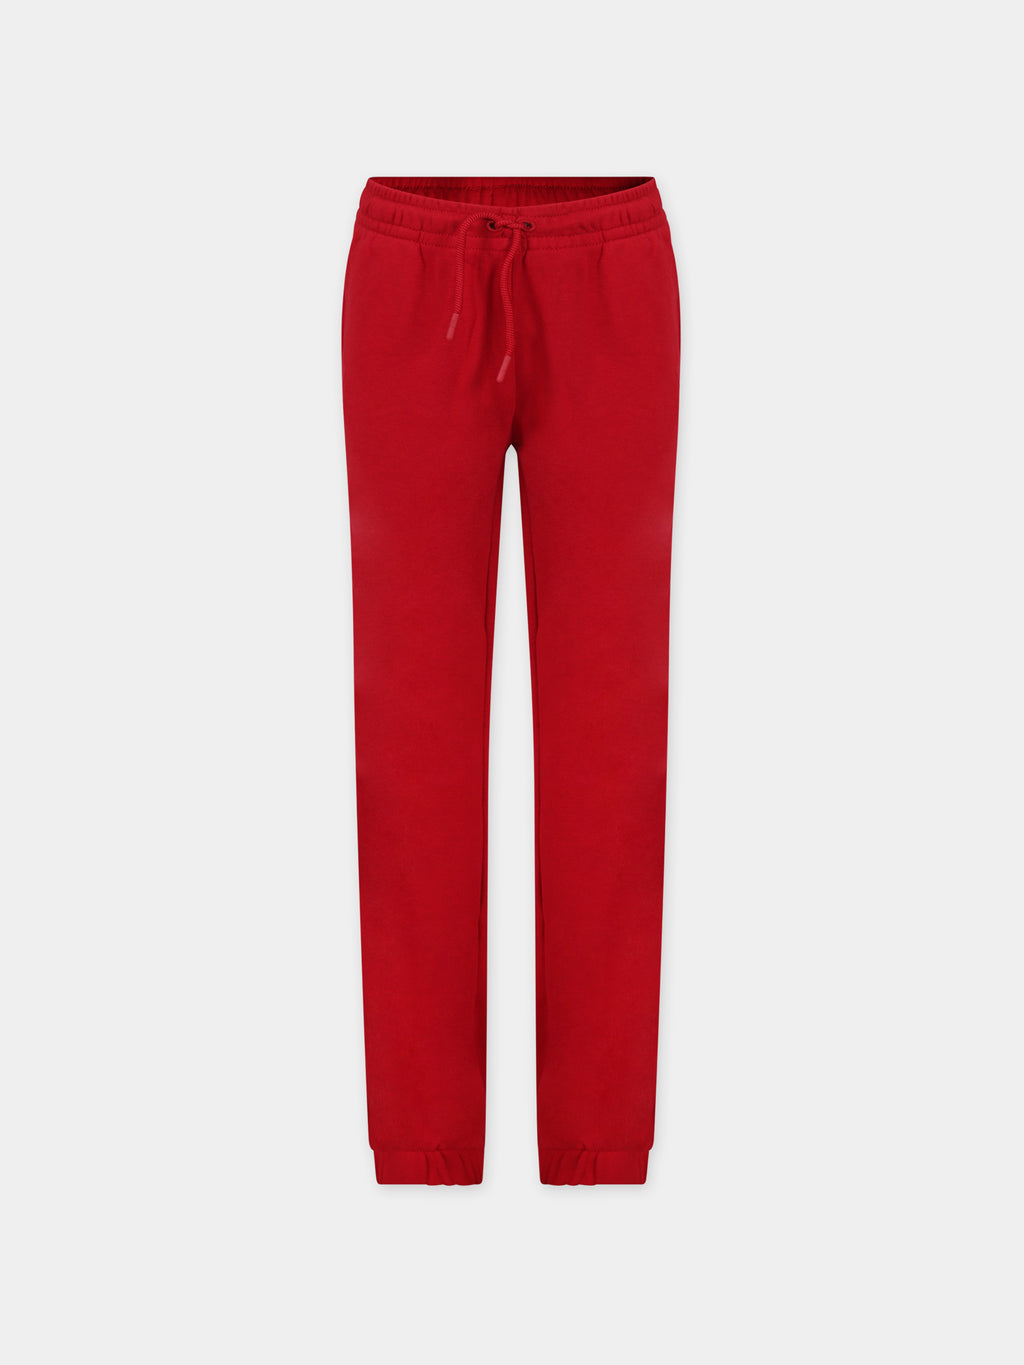 Red trousers for kids with embroidery